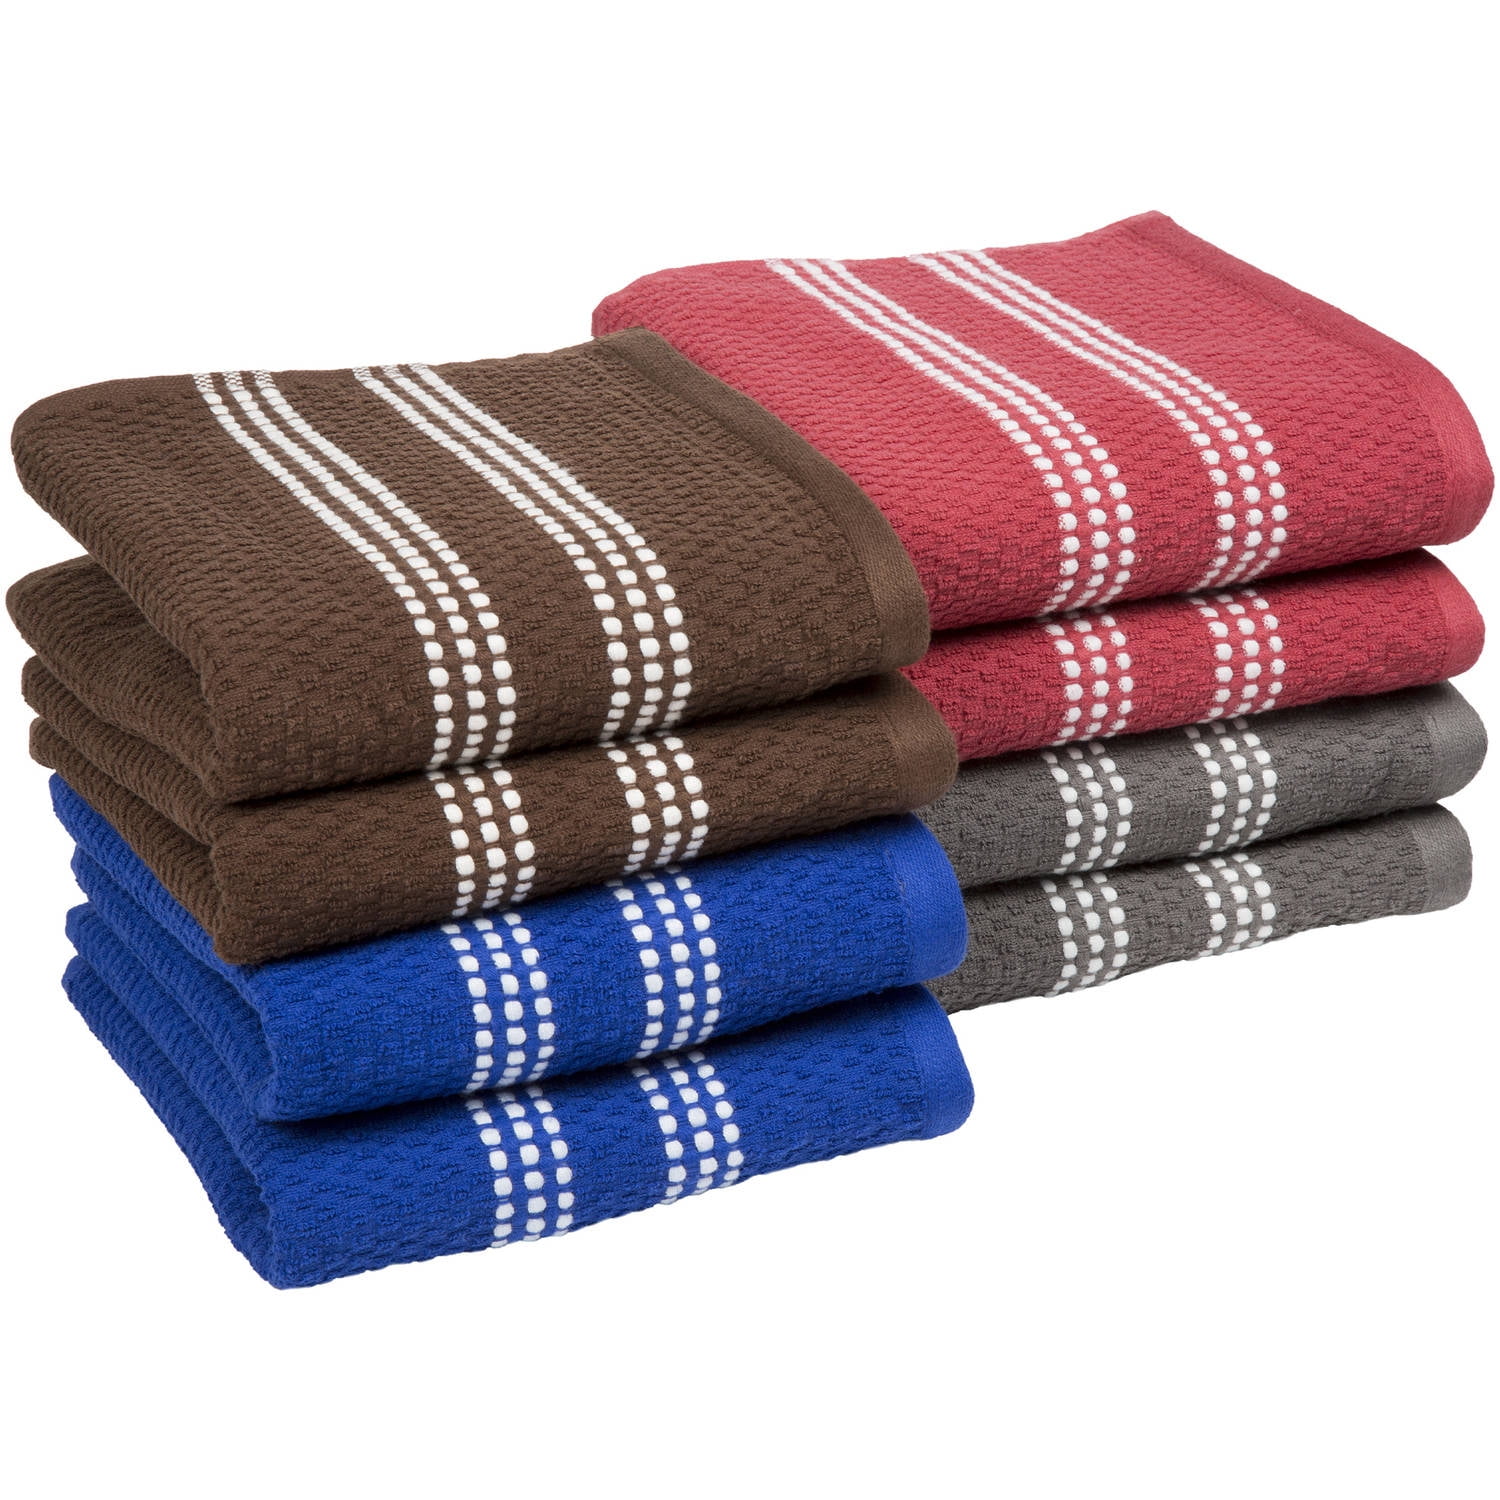 Frugal Hotspot - These distinctive-looking All-Clad Kitchen Towels from  Costco are such a good, thick quality towel. Plus, it's on sale at select  Costco locations through April 11, 2021. For more info->